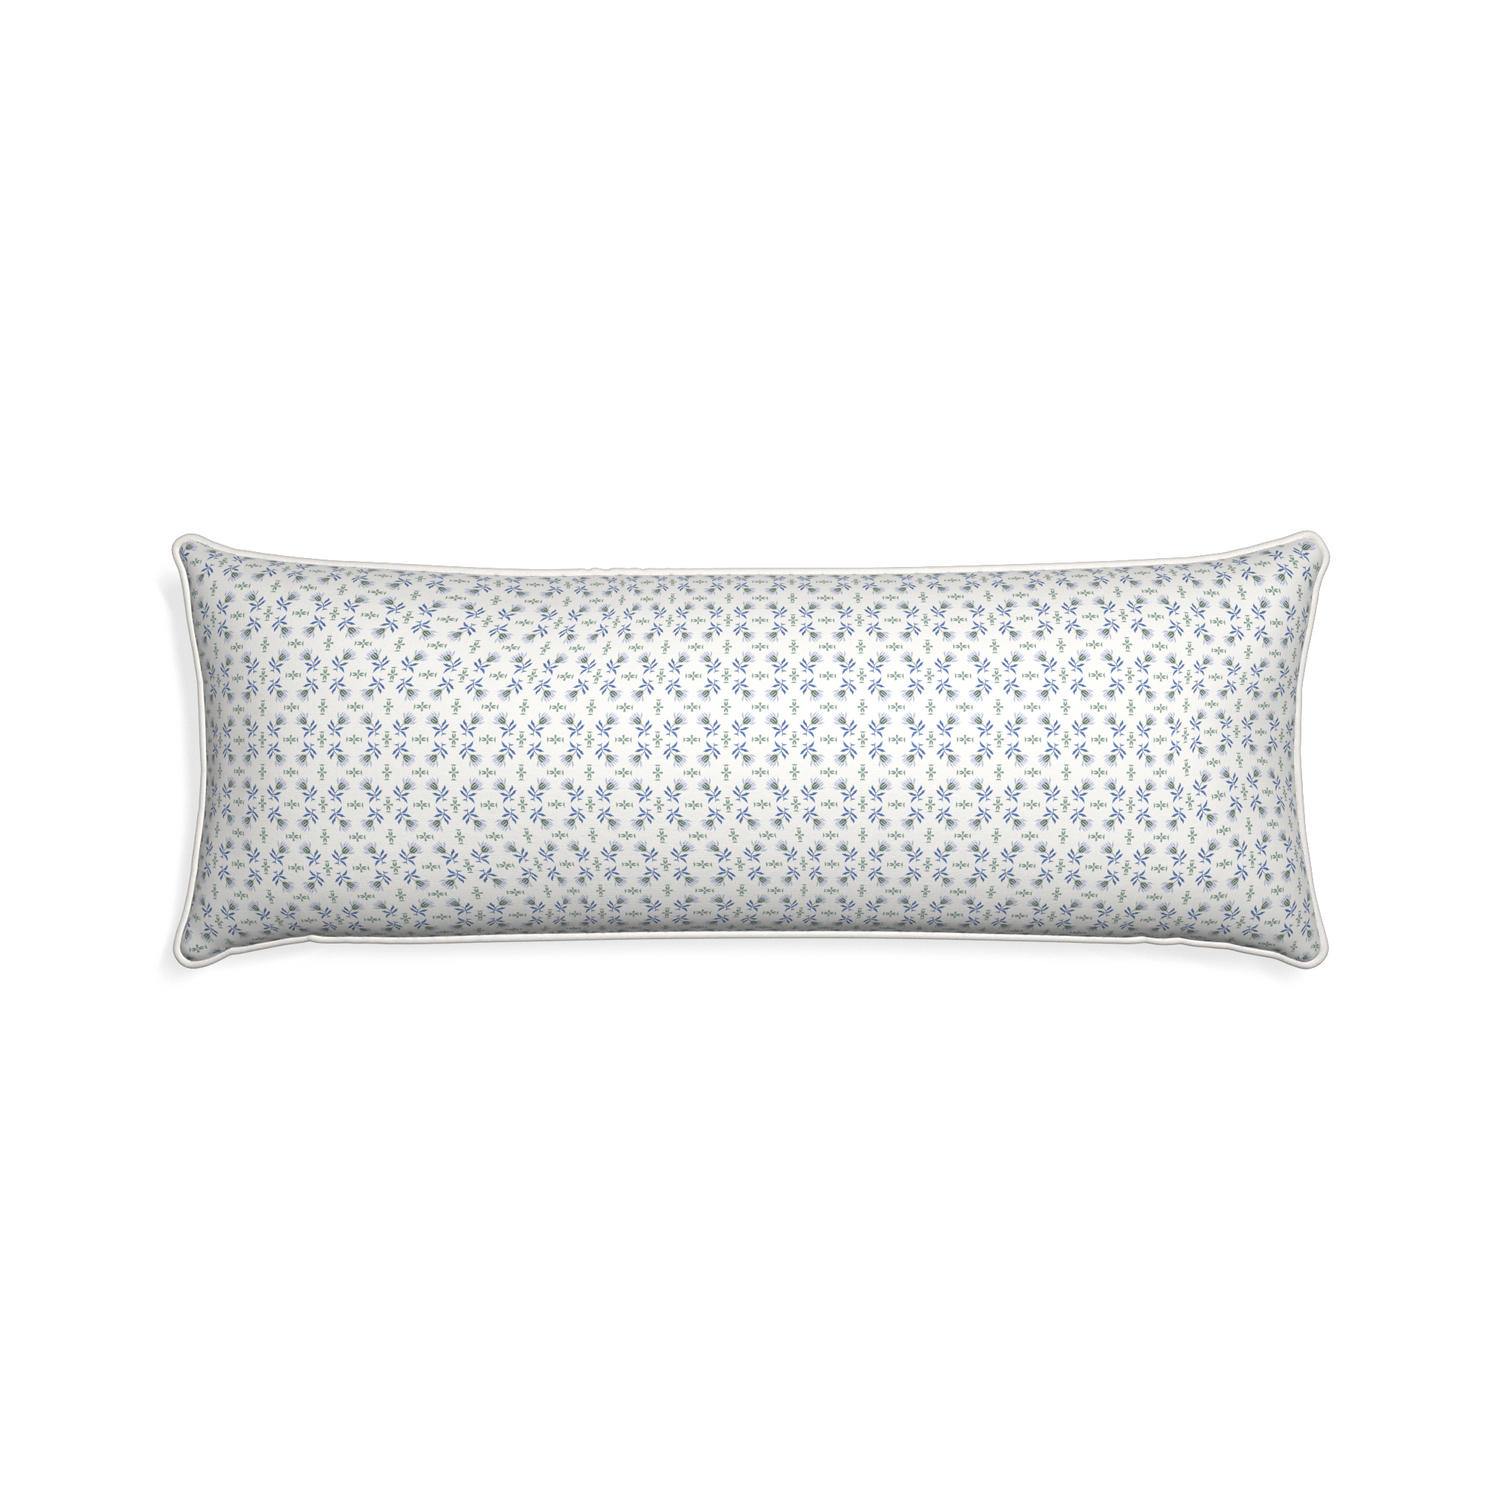 Xl-lumbar lee custom pillow with snow piping on white background